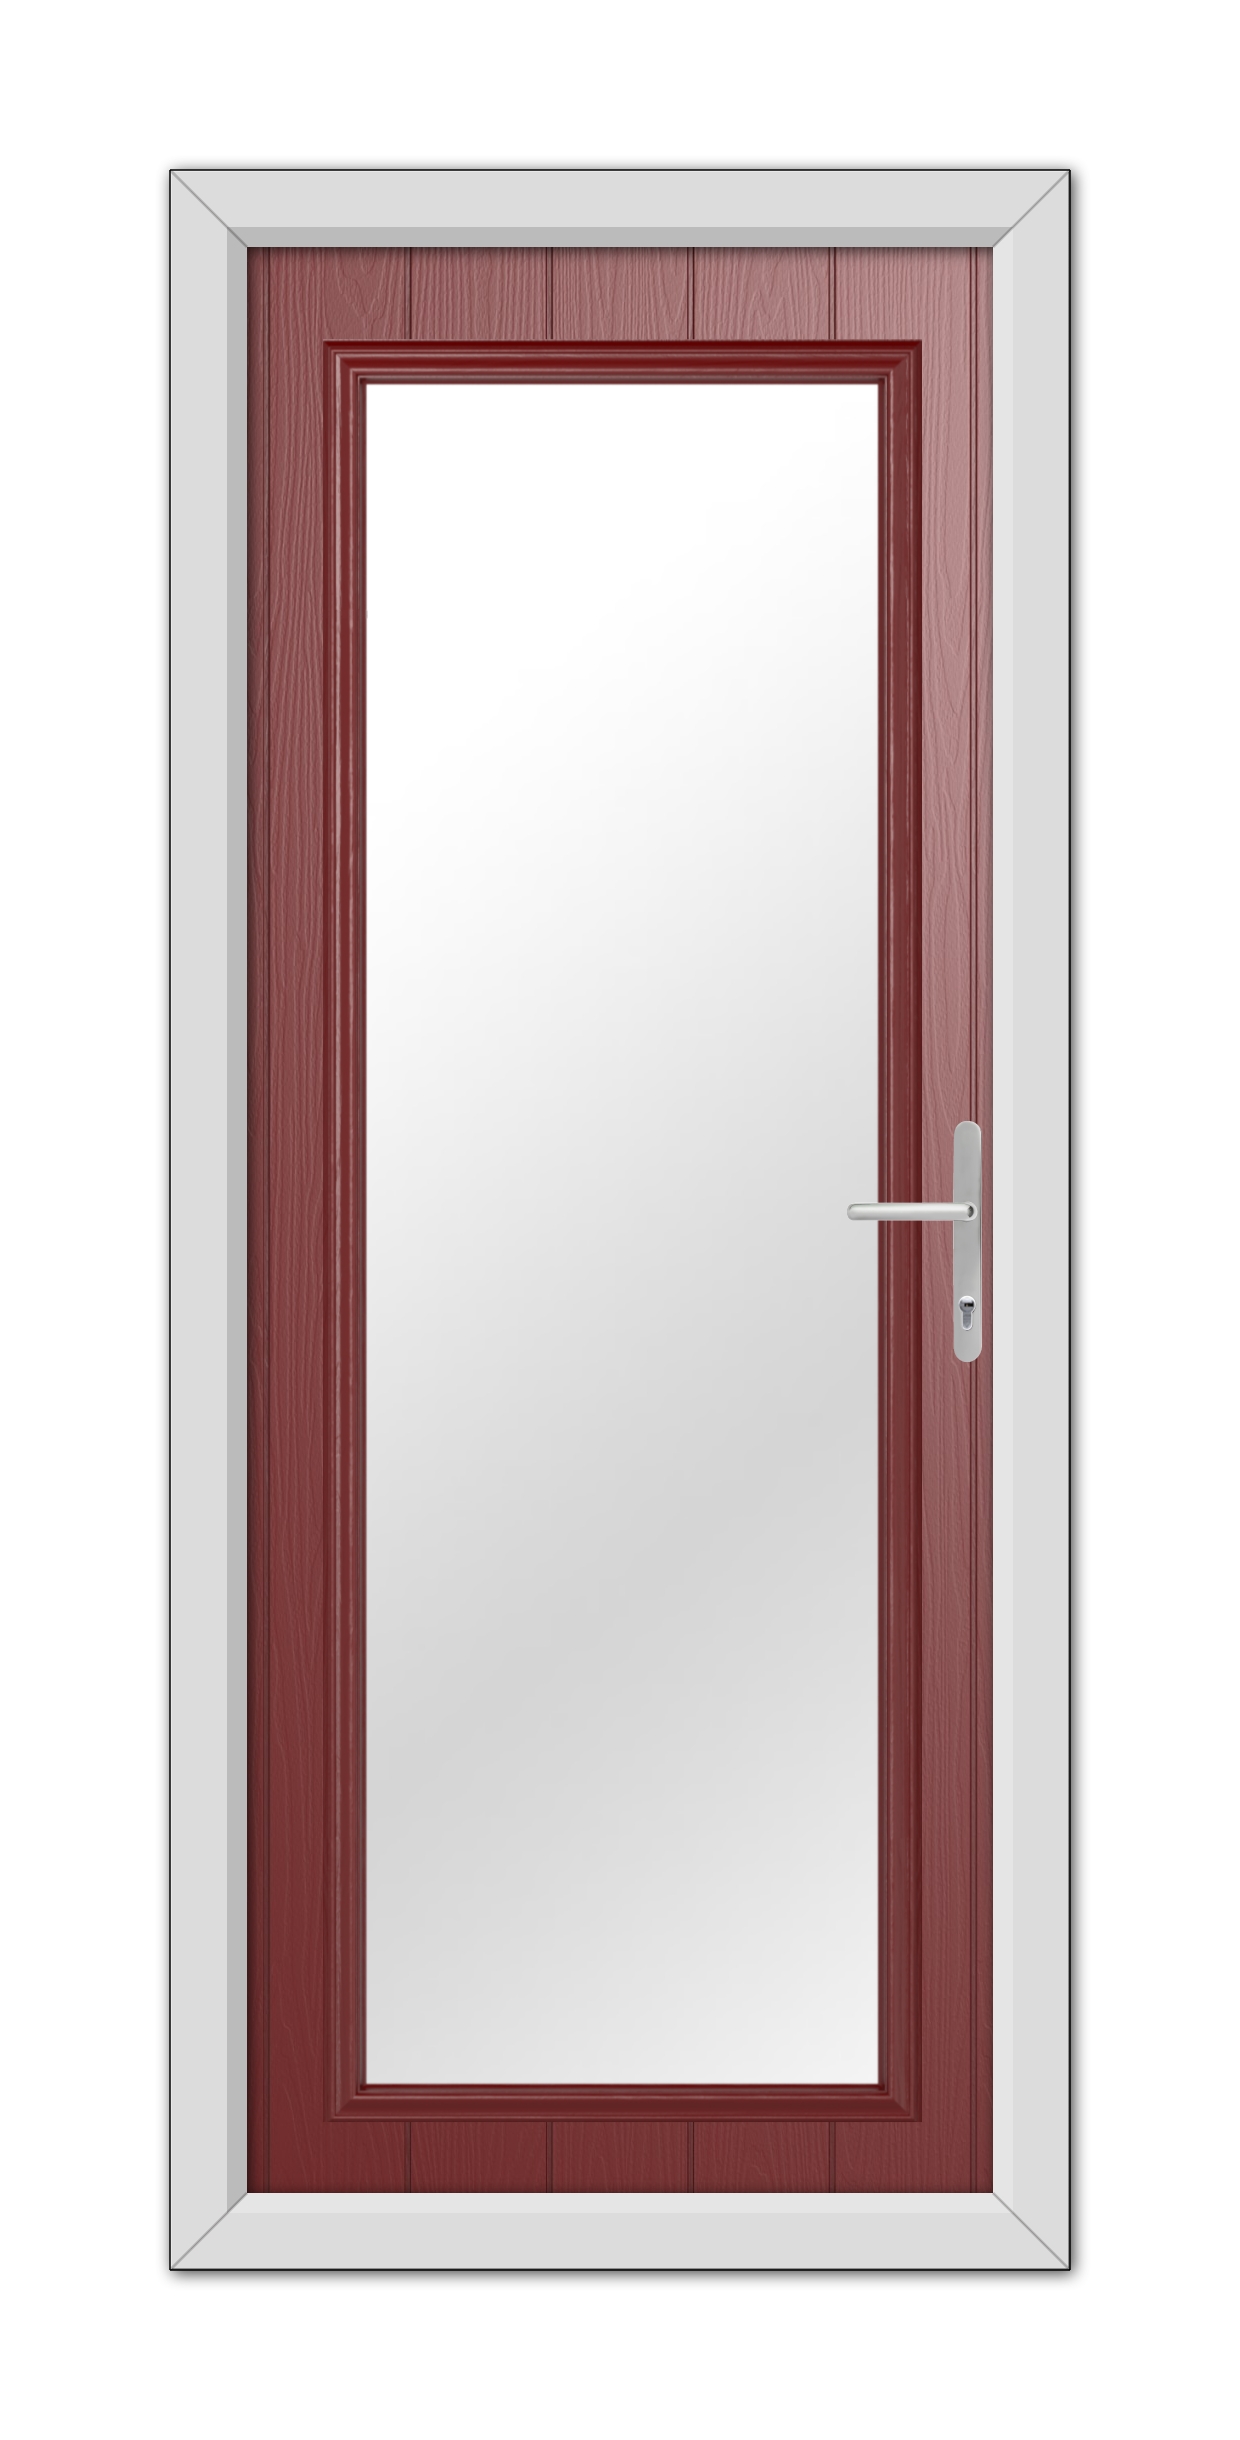 Closed Red Hatton Composite Door 48mm Timber Core with a white handle, set in a white frame, against a plain white background.